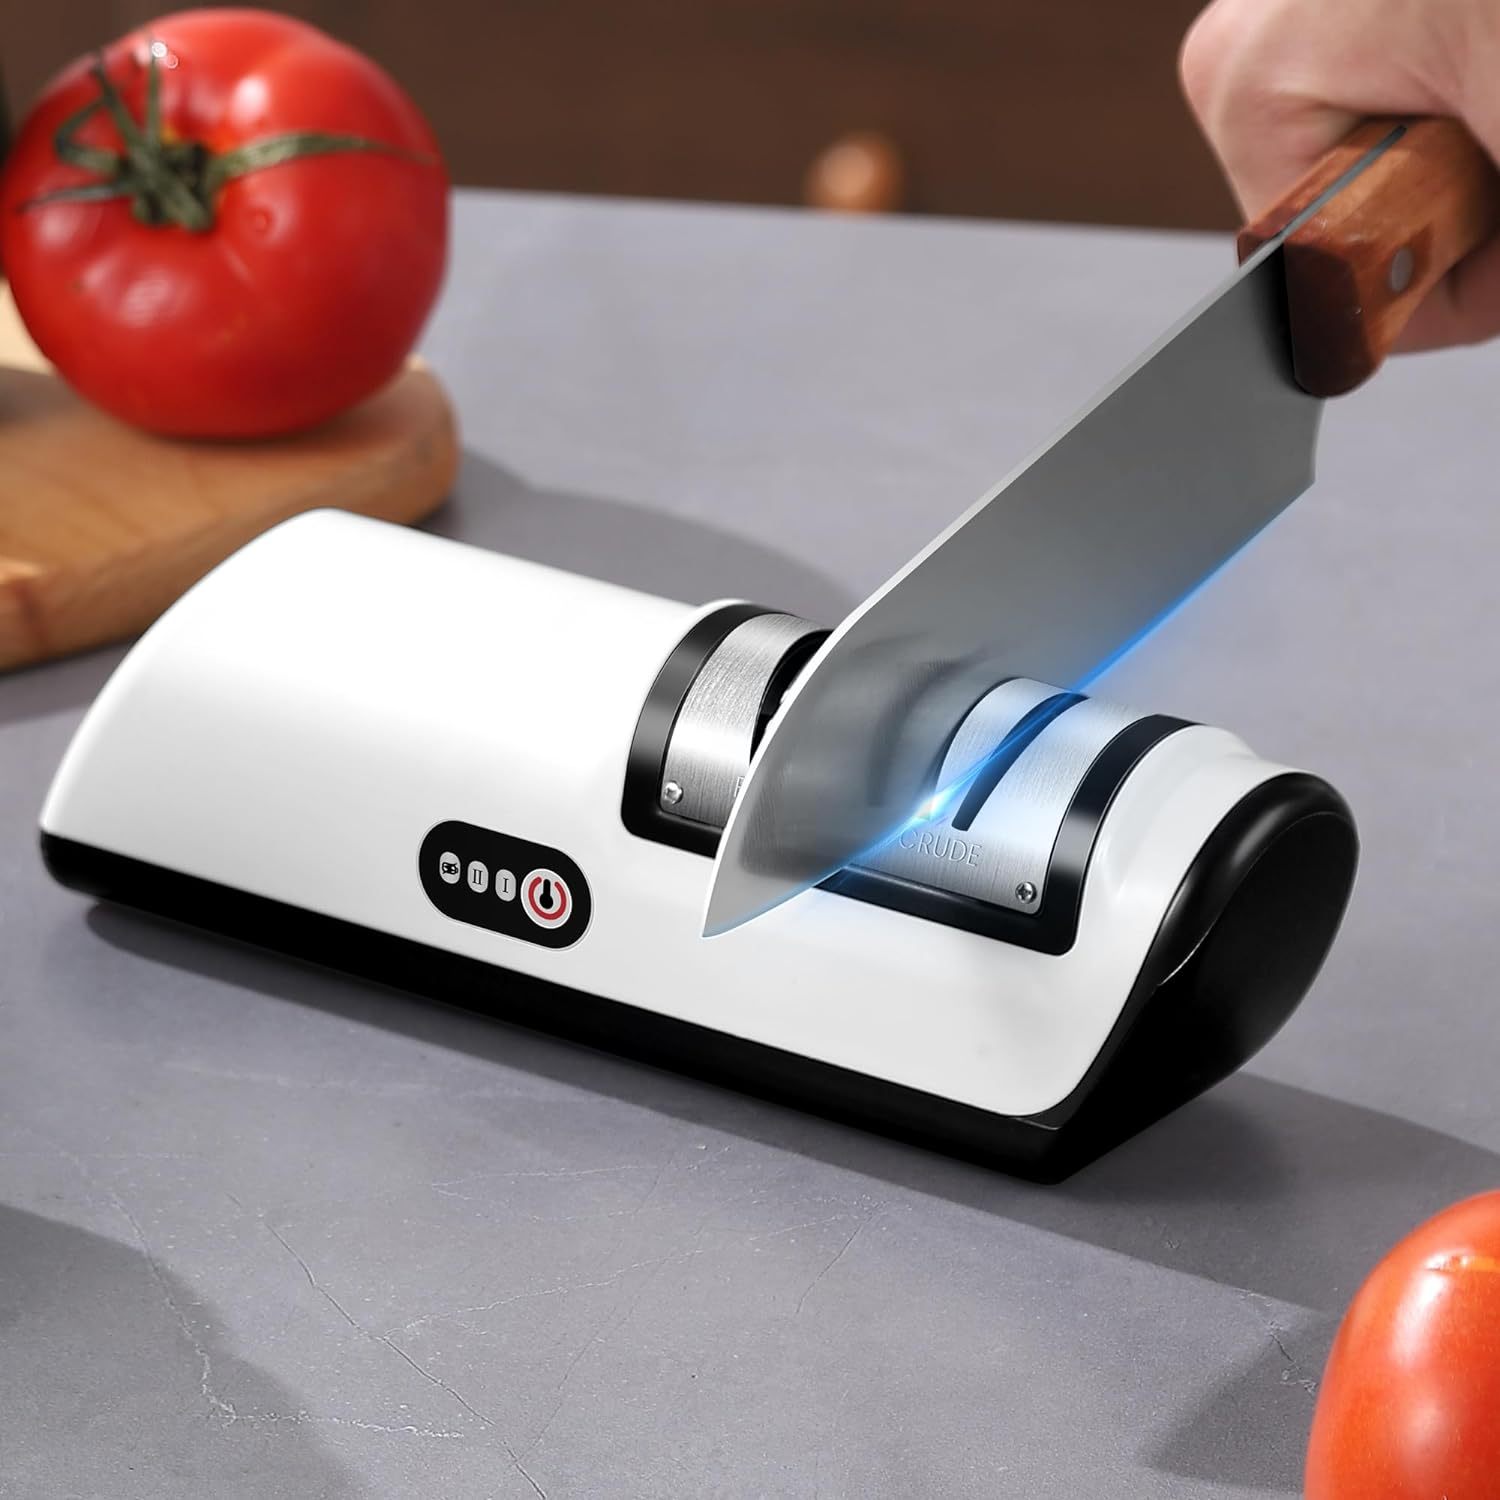 

Knife Sharpener Professional 2-stage Electric Knife Sharpener, Knife Sharpener For Kitchen Knives With Quick Sharpening And Polishing Function, Easy To Use For All Kinds Of Kitchen Knives.